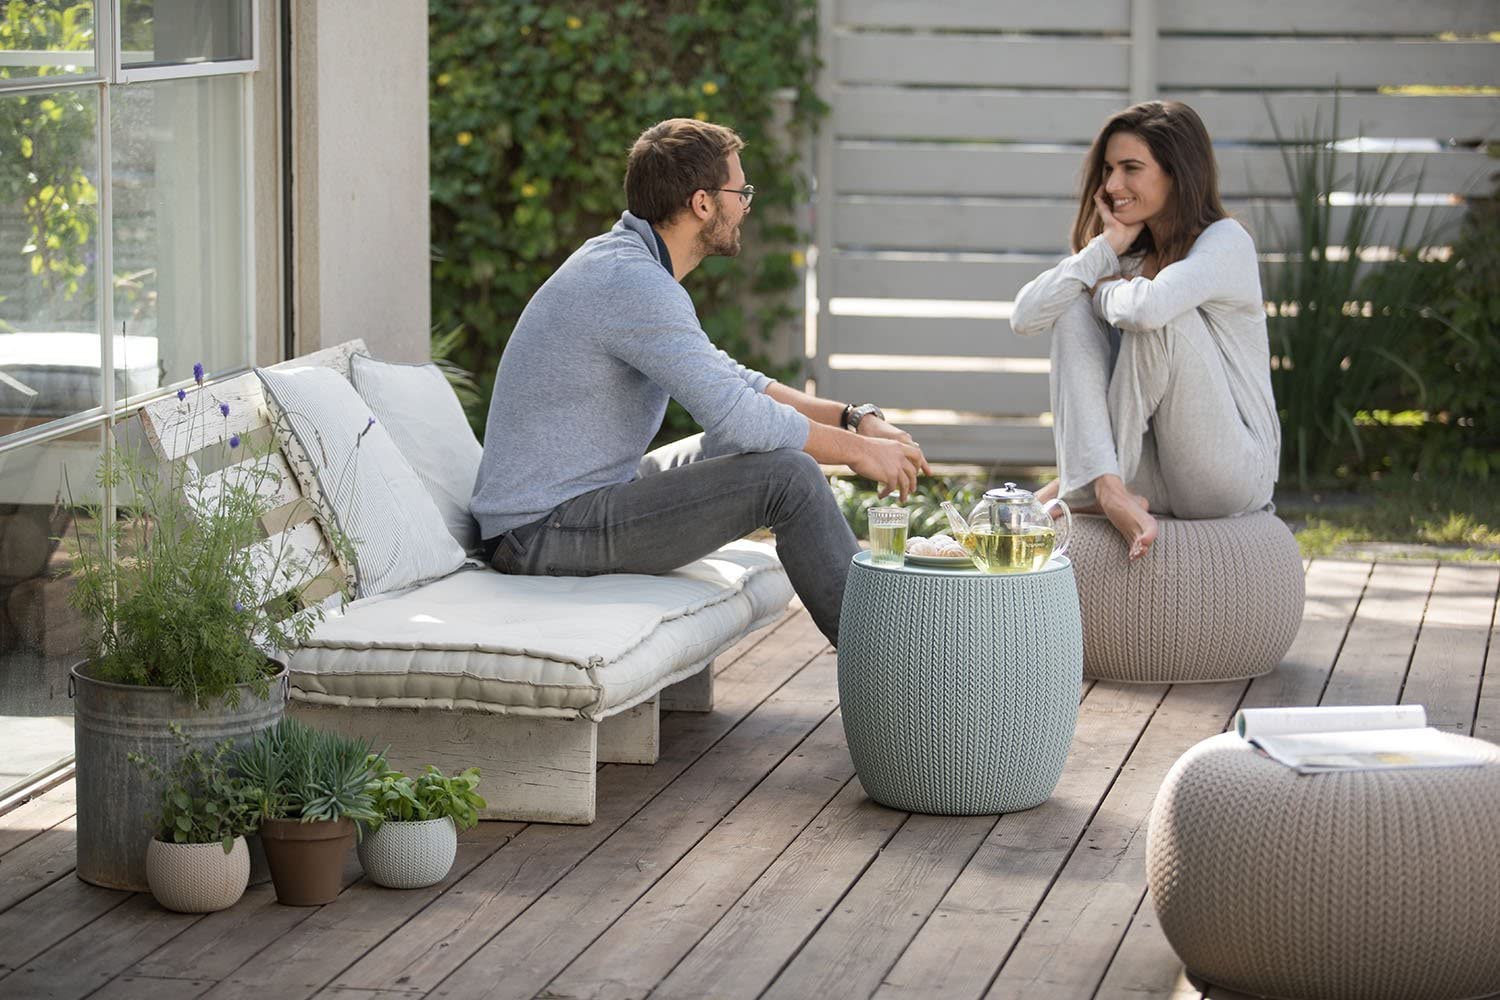 Keter Urban Knit 1 15 Unique Furniture Designs for Outdoor Small Spaces - 12